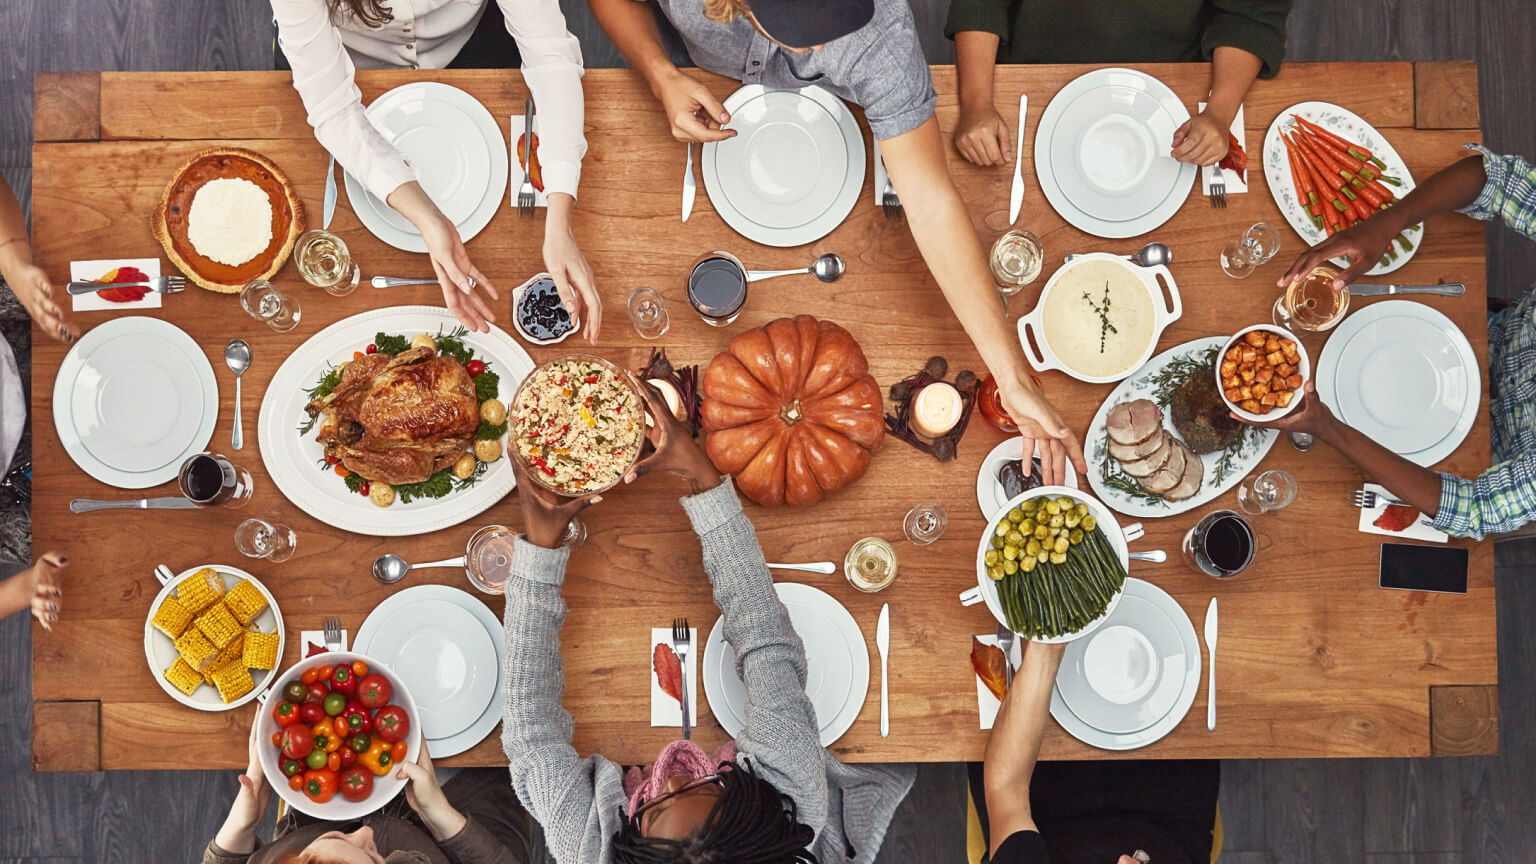 Shot of a group of people sitting together at a dining table ready to eat